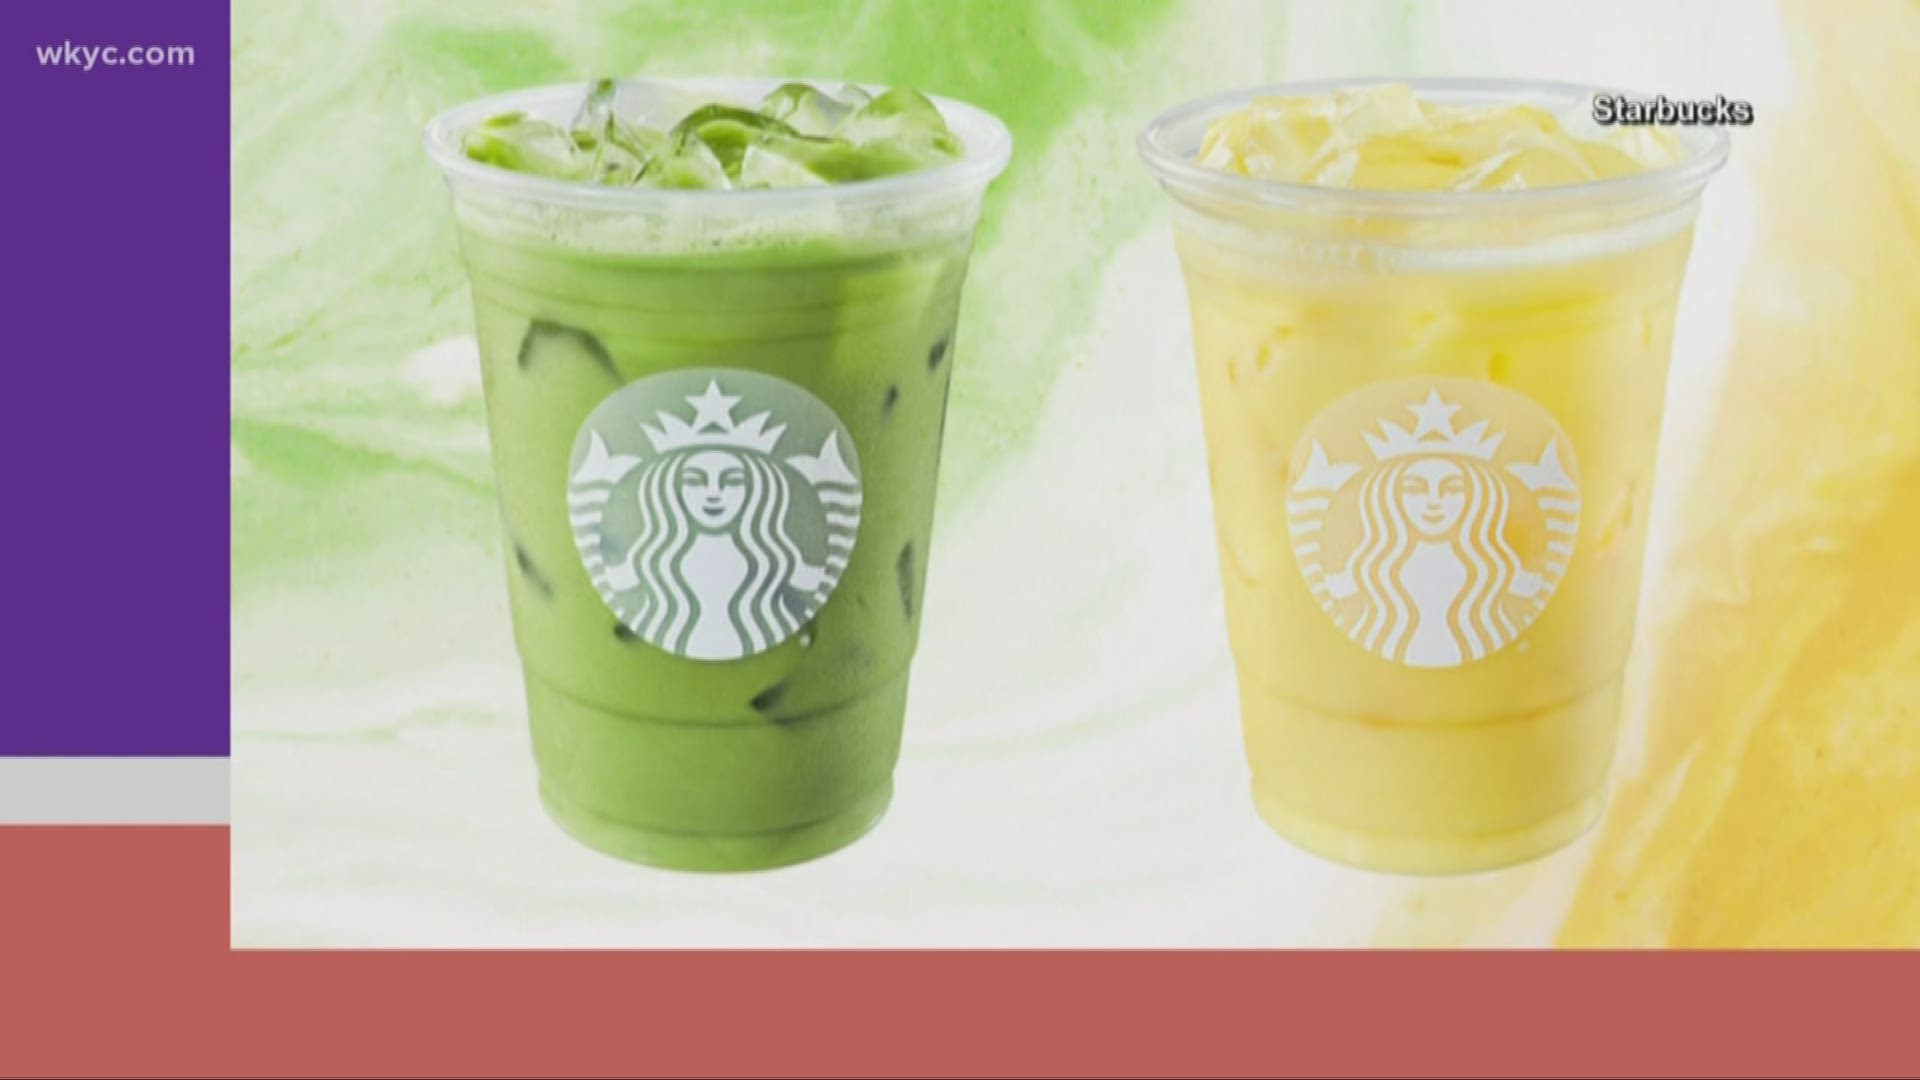 Spring is just around the corner! These are the new seasonal drinks from Starbucks!